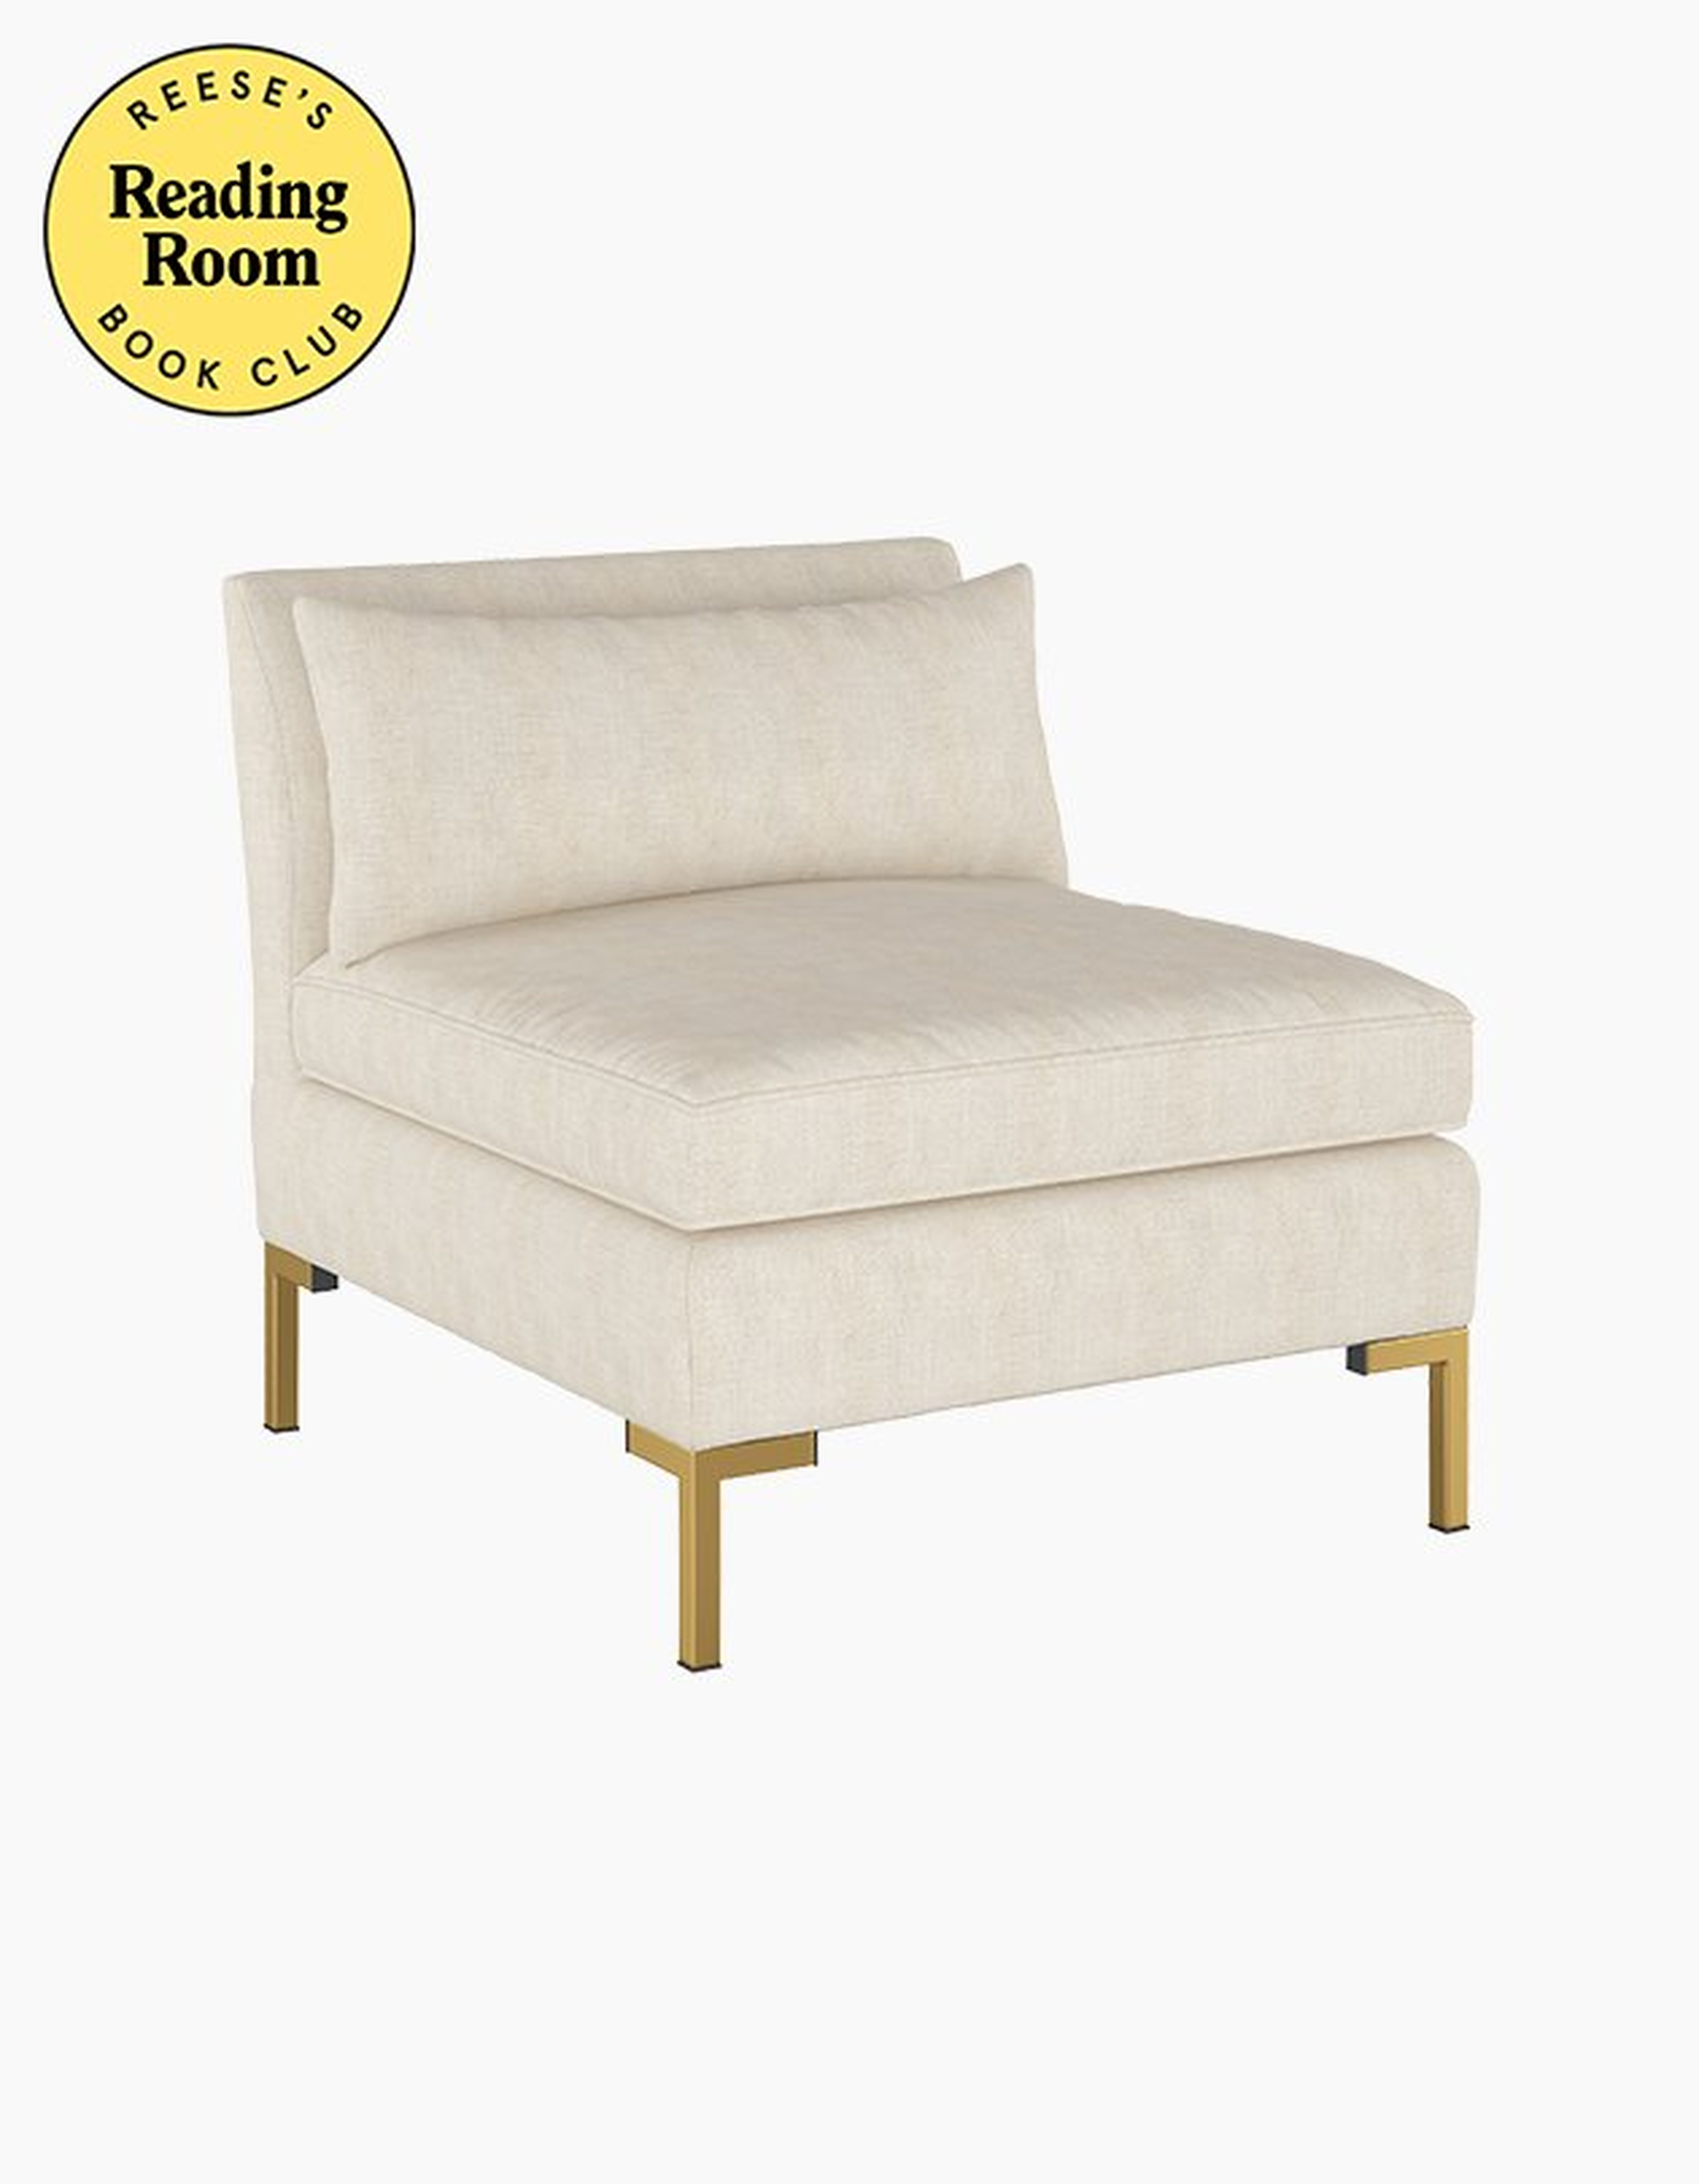 Elle Chair - Talc Linen - Reese's Book Club x Havenly